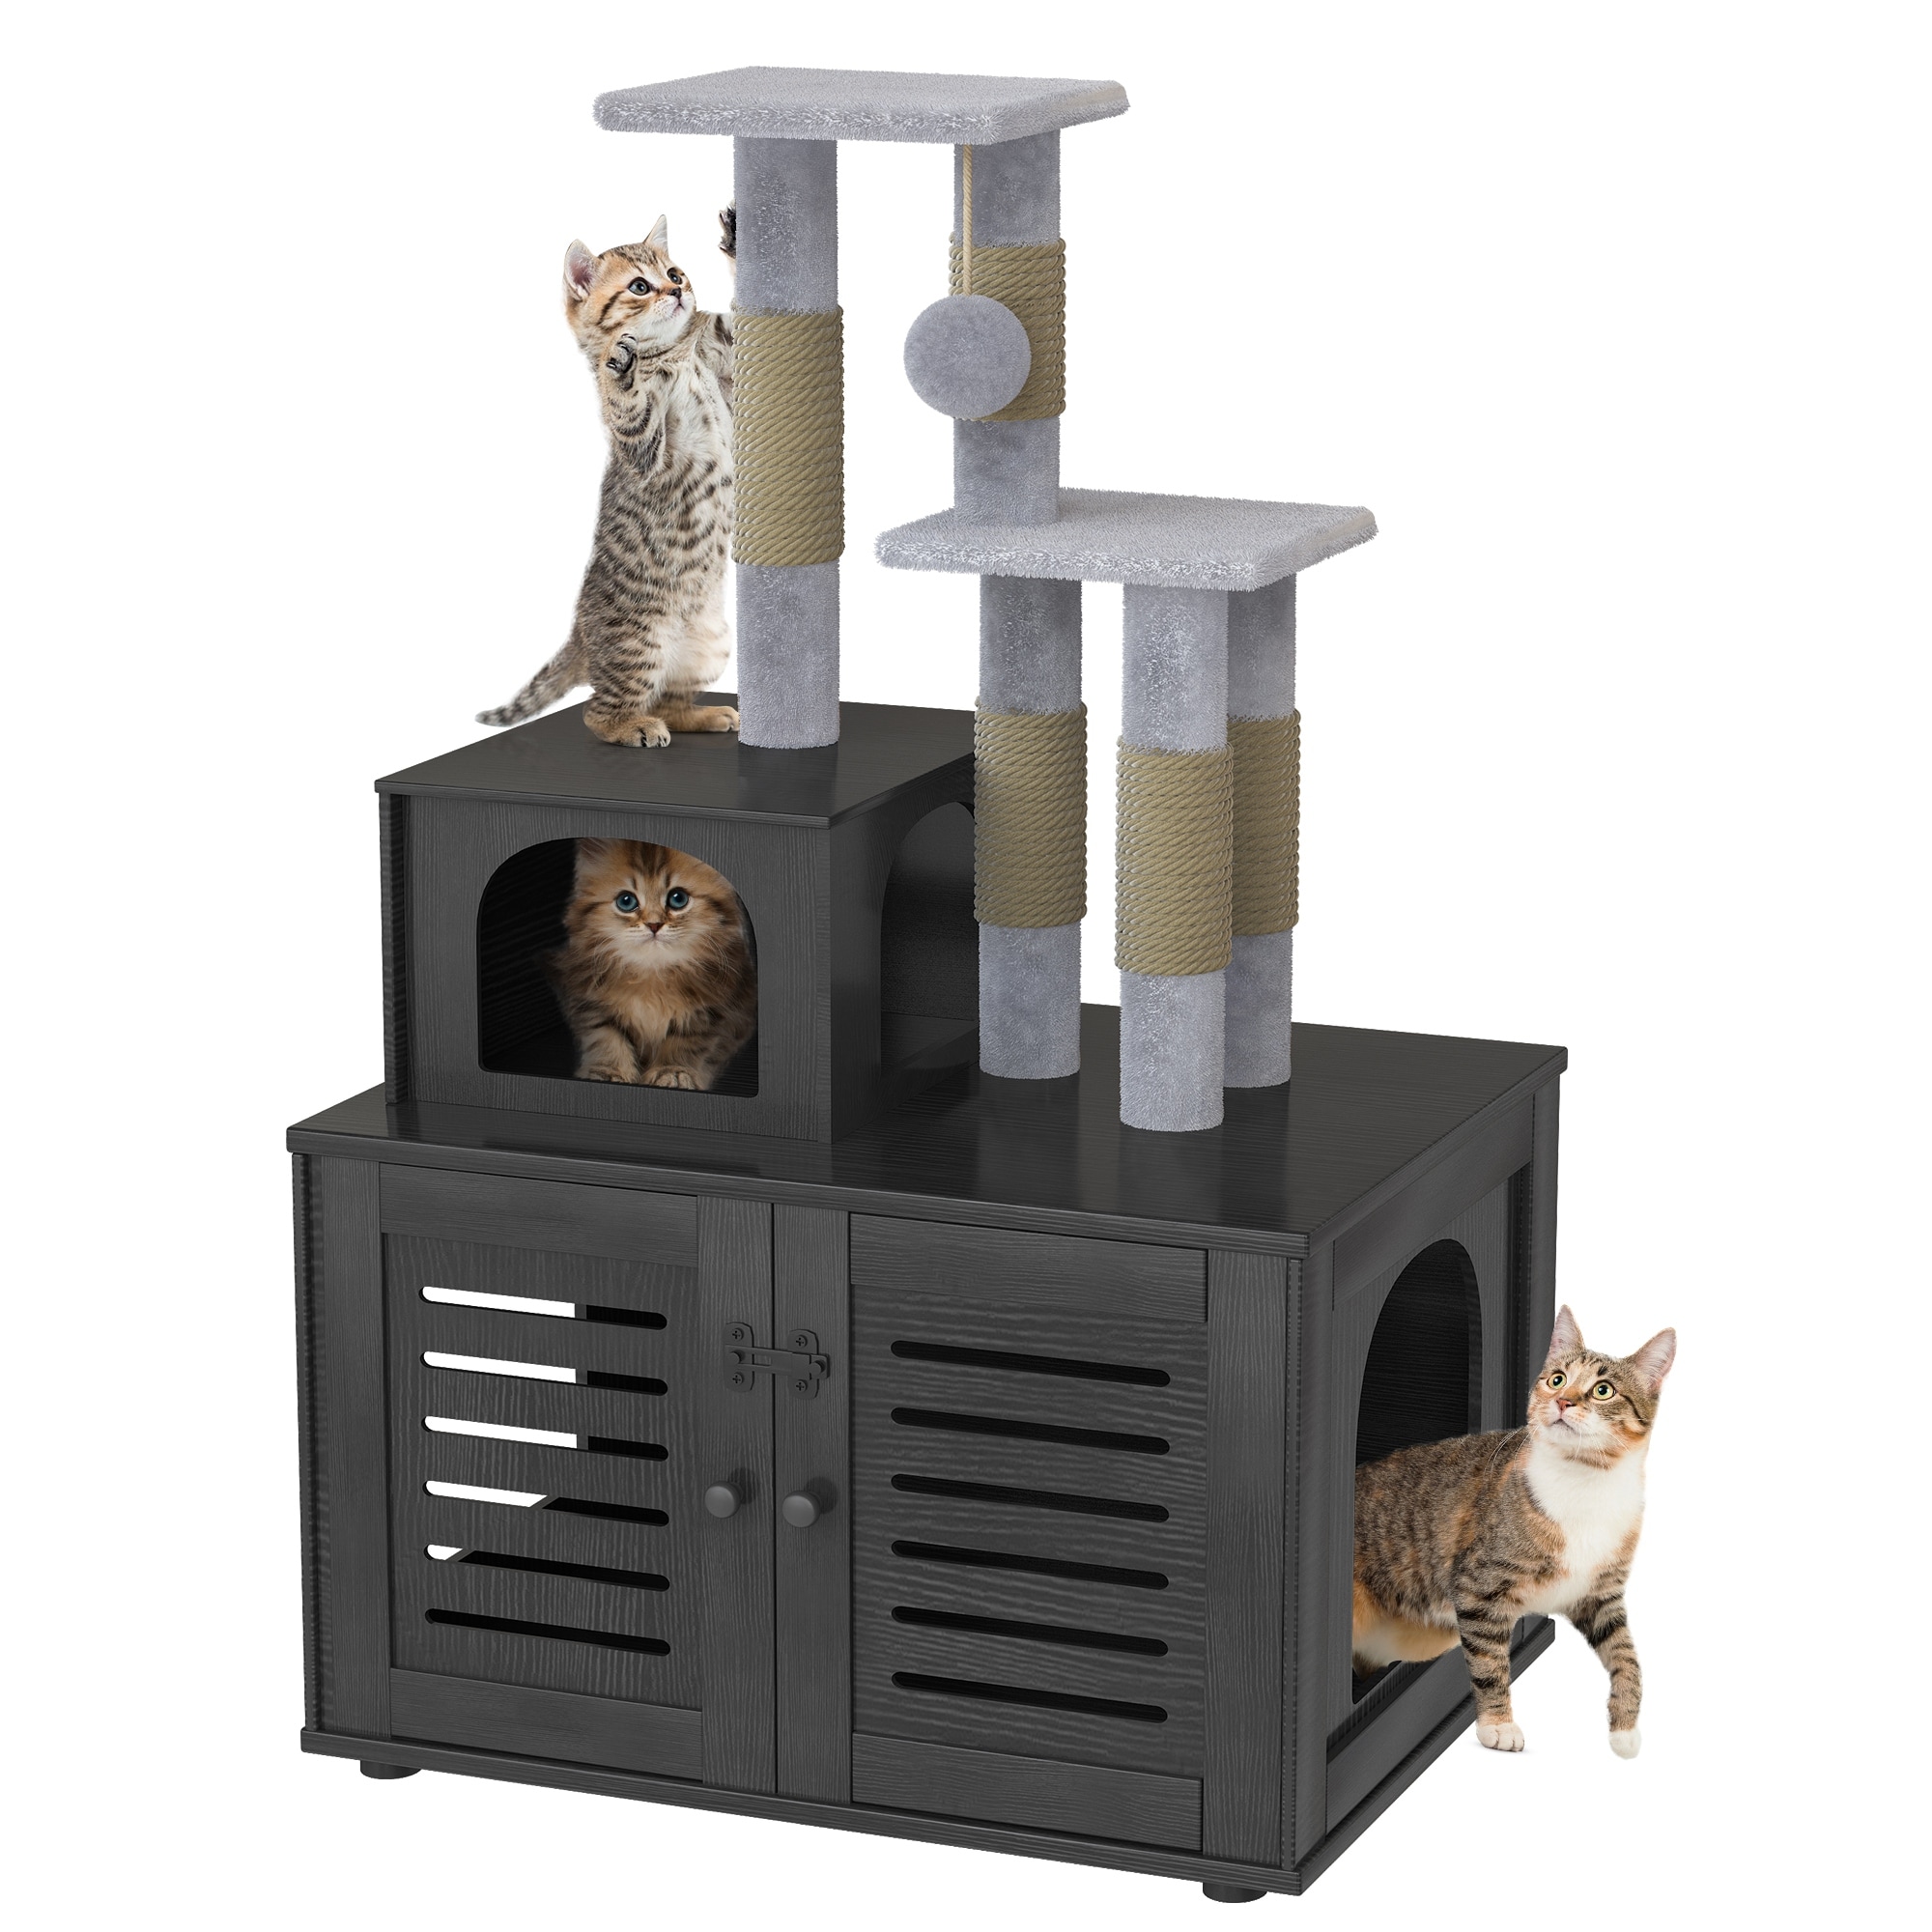 https://ak1.ostkcdn.com/images/products/is/images/direct/1df4be970813007a6f129cf6ec8ddf8b4c91d1d9/Cat-Tree-with-Wood-Litter-Box-Enclosure%2C-All-in-one-Indoor-Cat-Furniture-with-Large-Platform-and-Cat-Condo-House.jpg